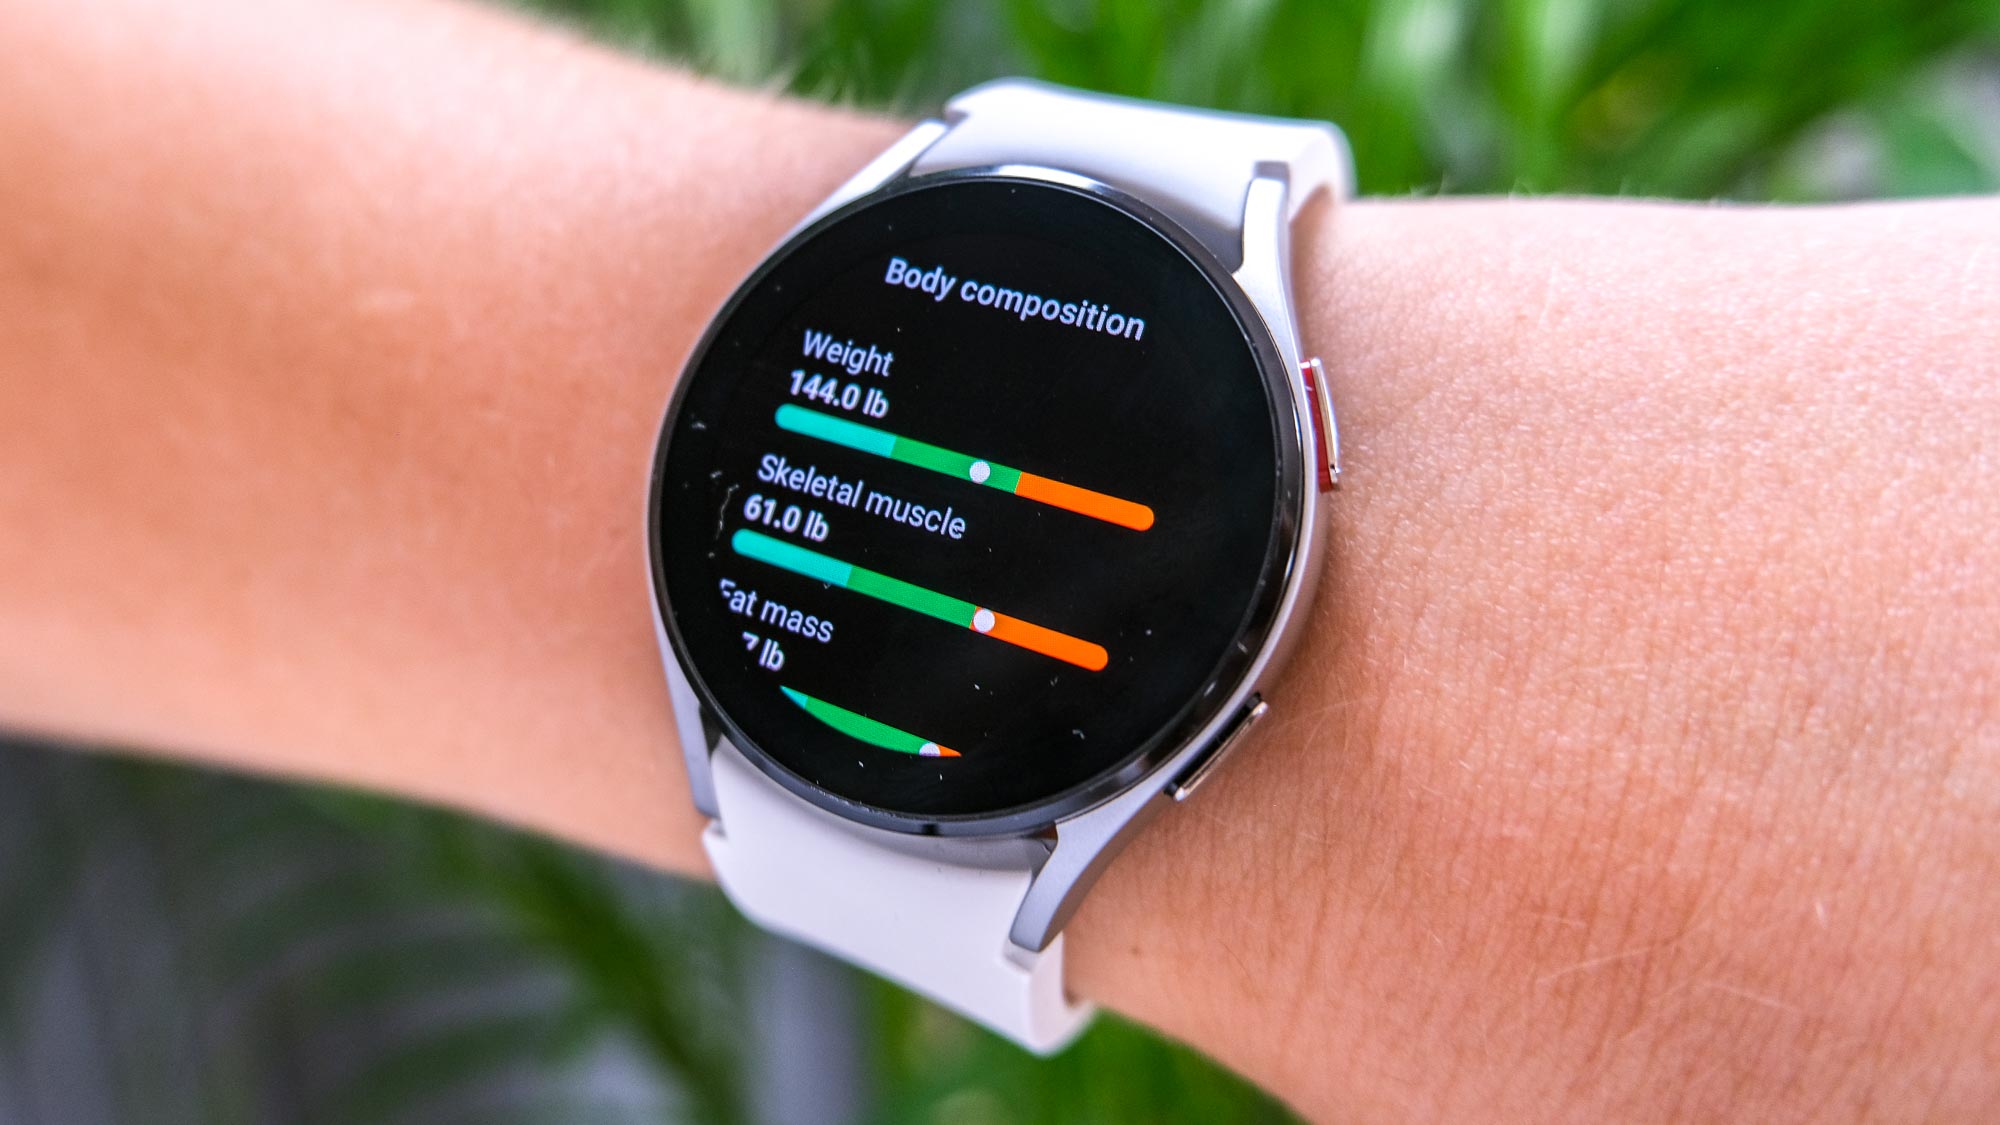 Samsung Galaxy Watch 4 on a wrist, showing body composition analysis